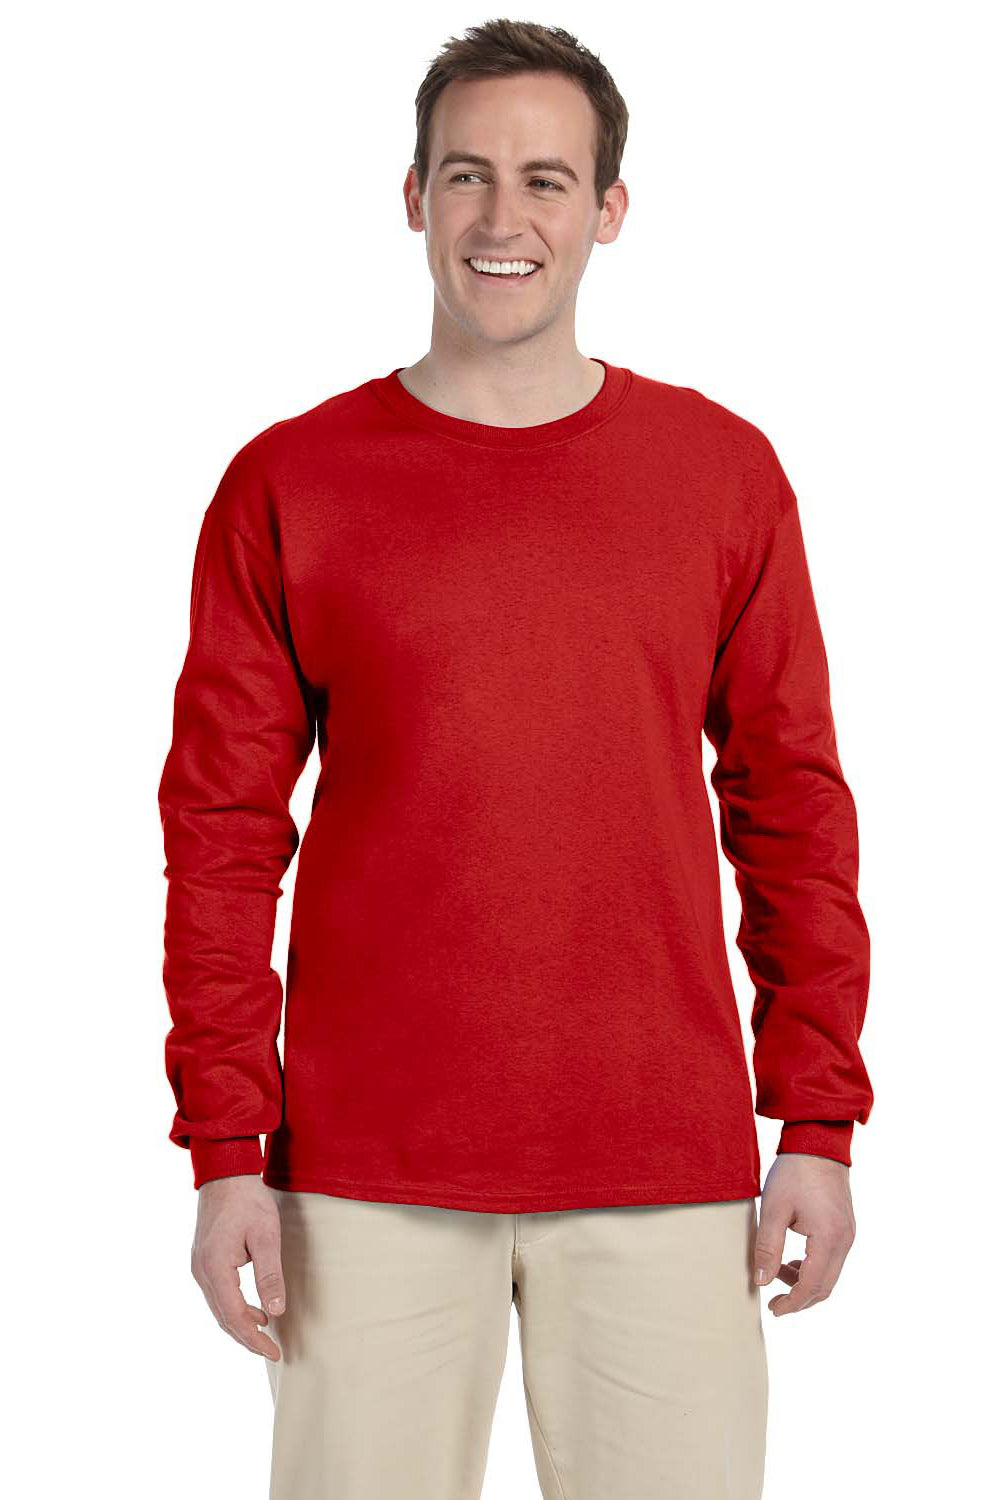 Fruit Of The Loom 4930 Mens HD Jersey Long Sleeve Crewneck T-Shirt Red Front